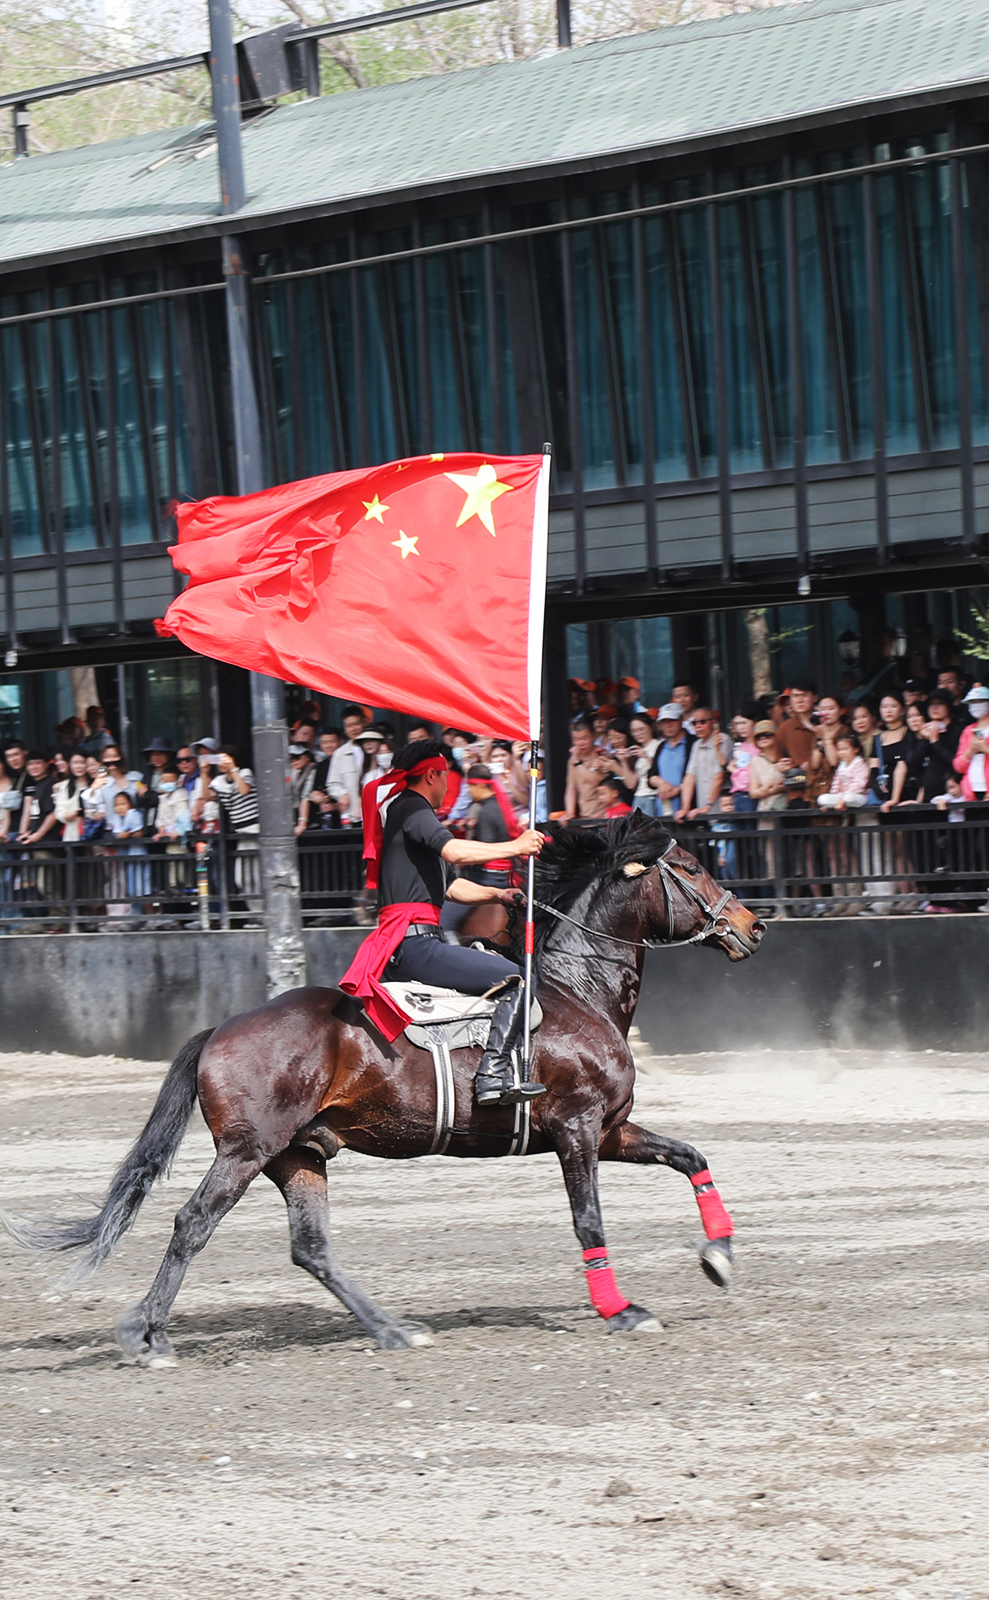 A rider holds China's national flag during a performance at a horse base in Urumqi, Xinjiang. /CGTN